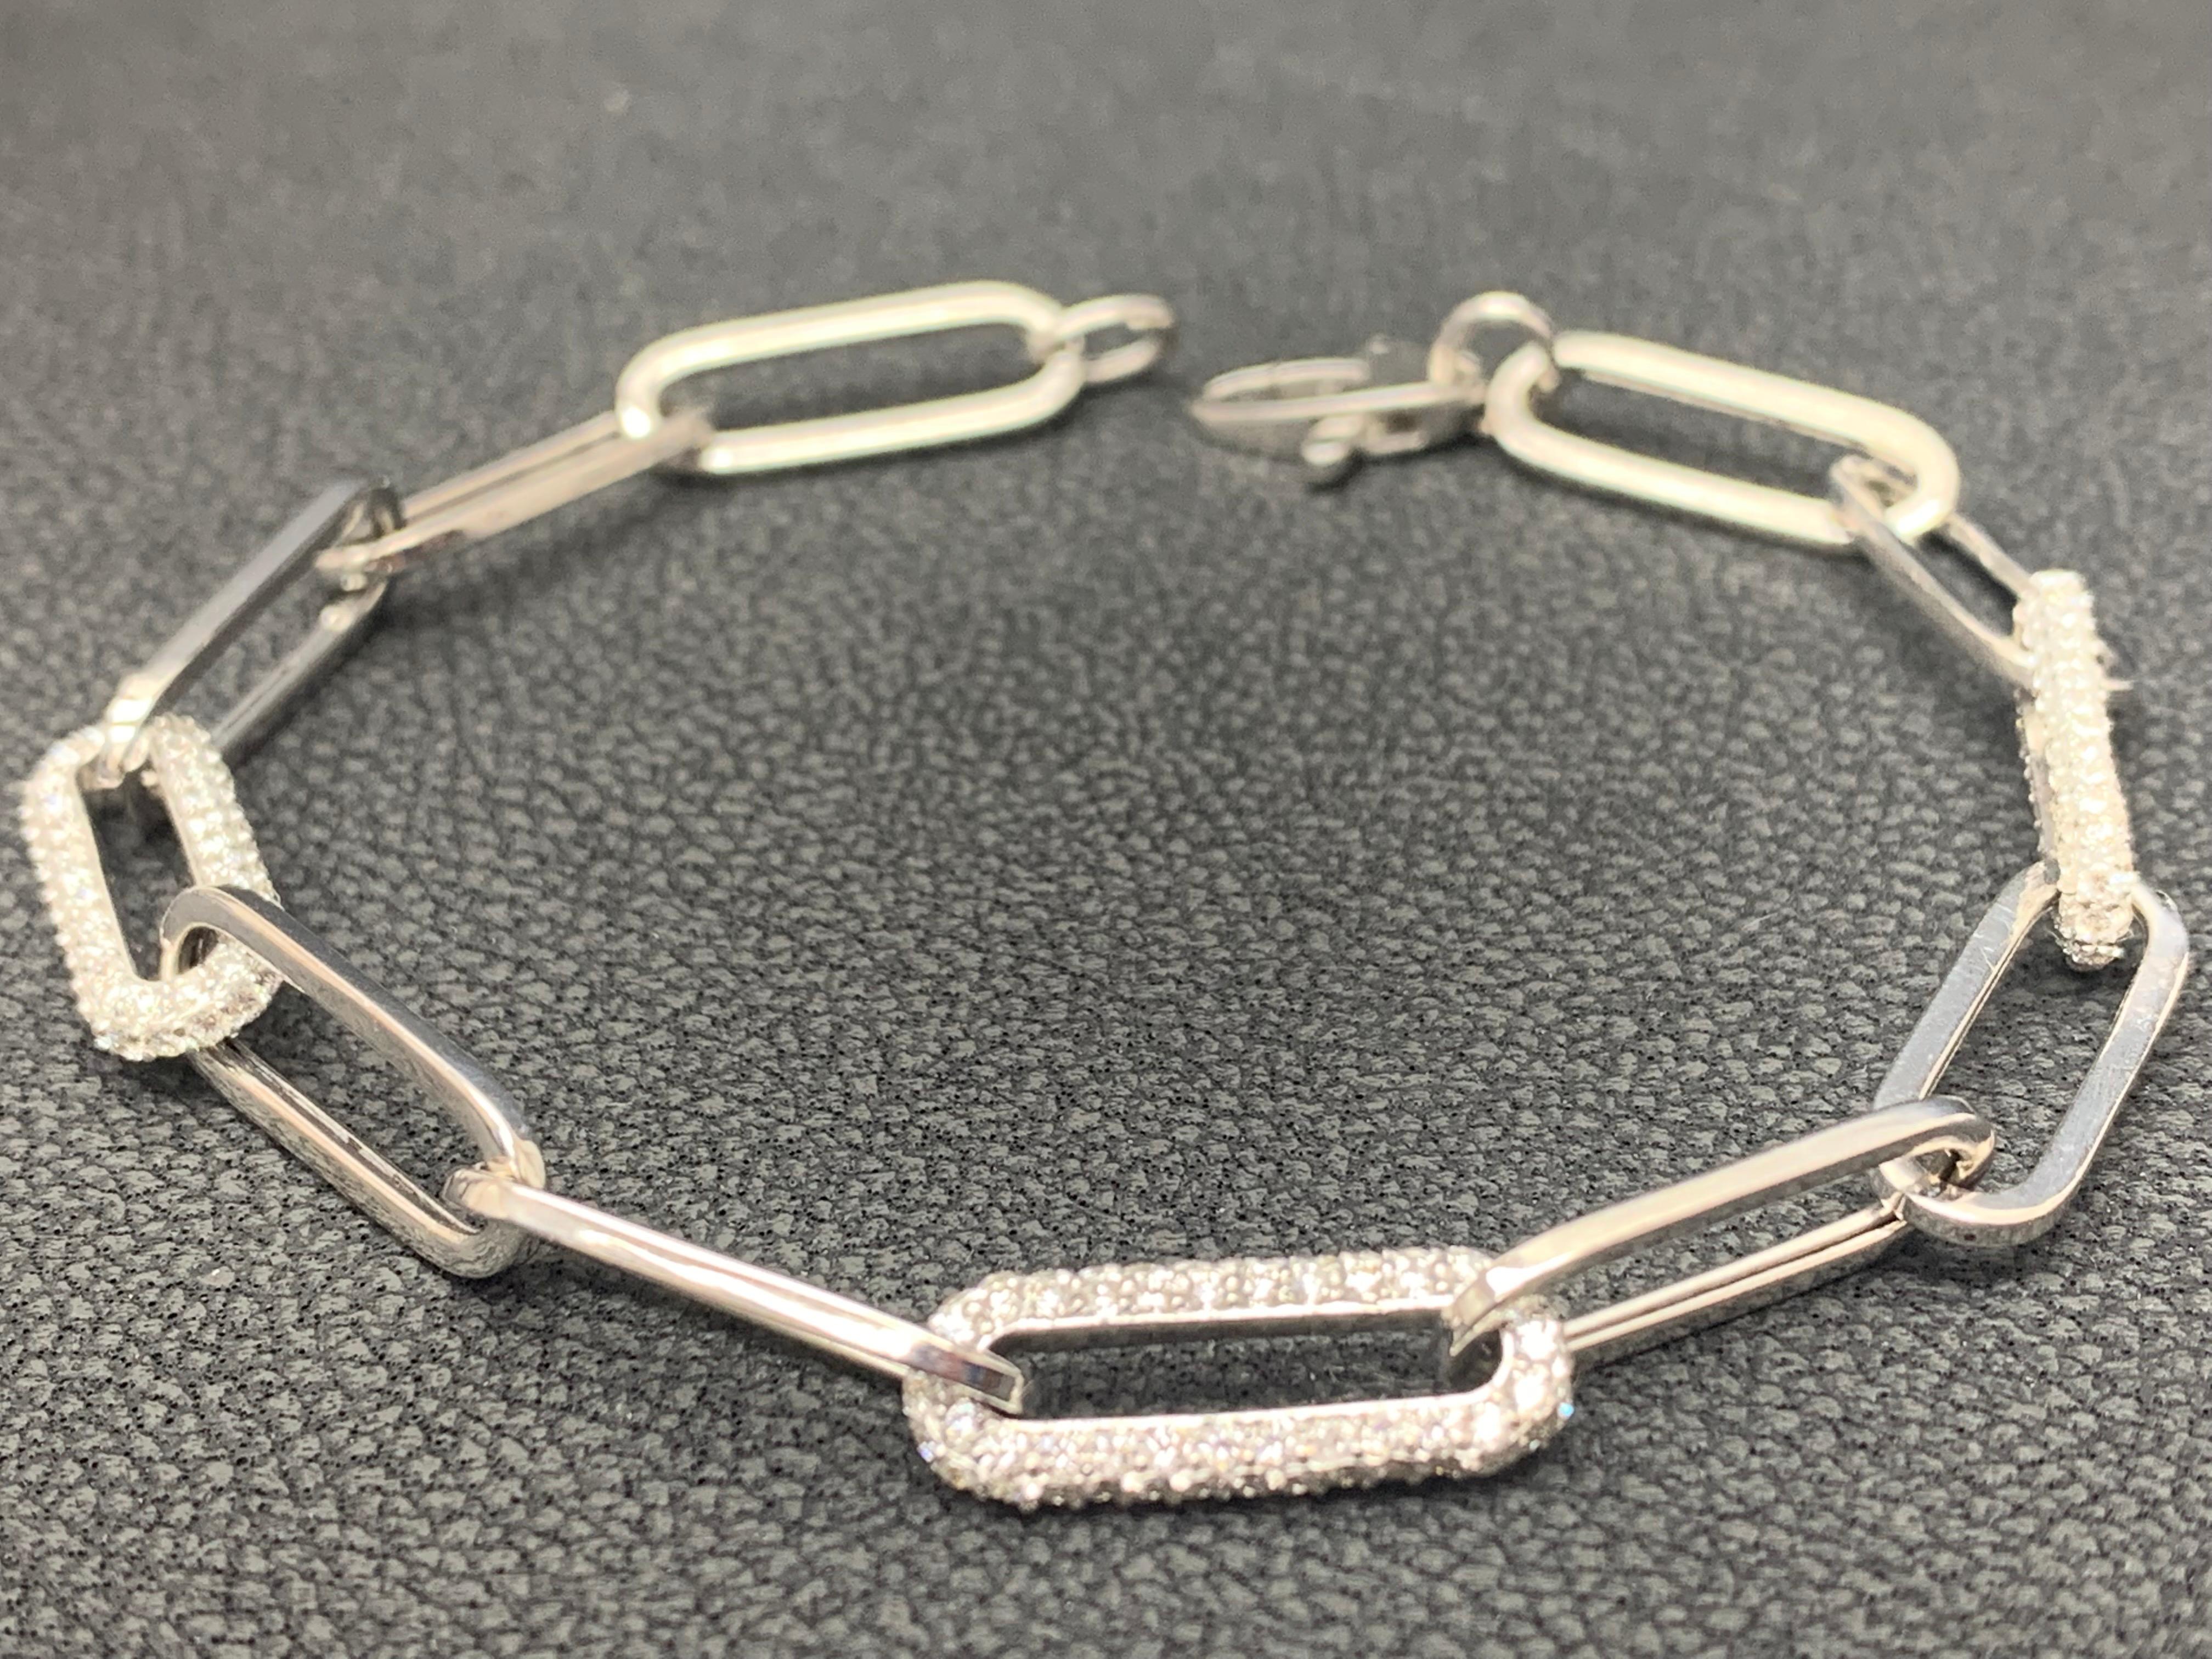 This Elegant & Beautiful 14K White Gold Bracelet featuring 3 diamond clips towards the center weighs 1.92 carats  with a lobster clasp.


All diamonds are GH color SI1 Clarity.
Available in Rose and Yellow as well.
Style available in different price